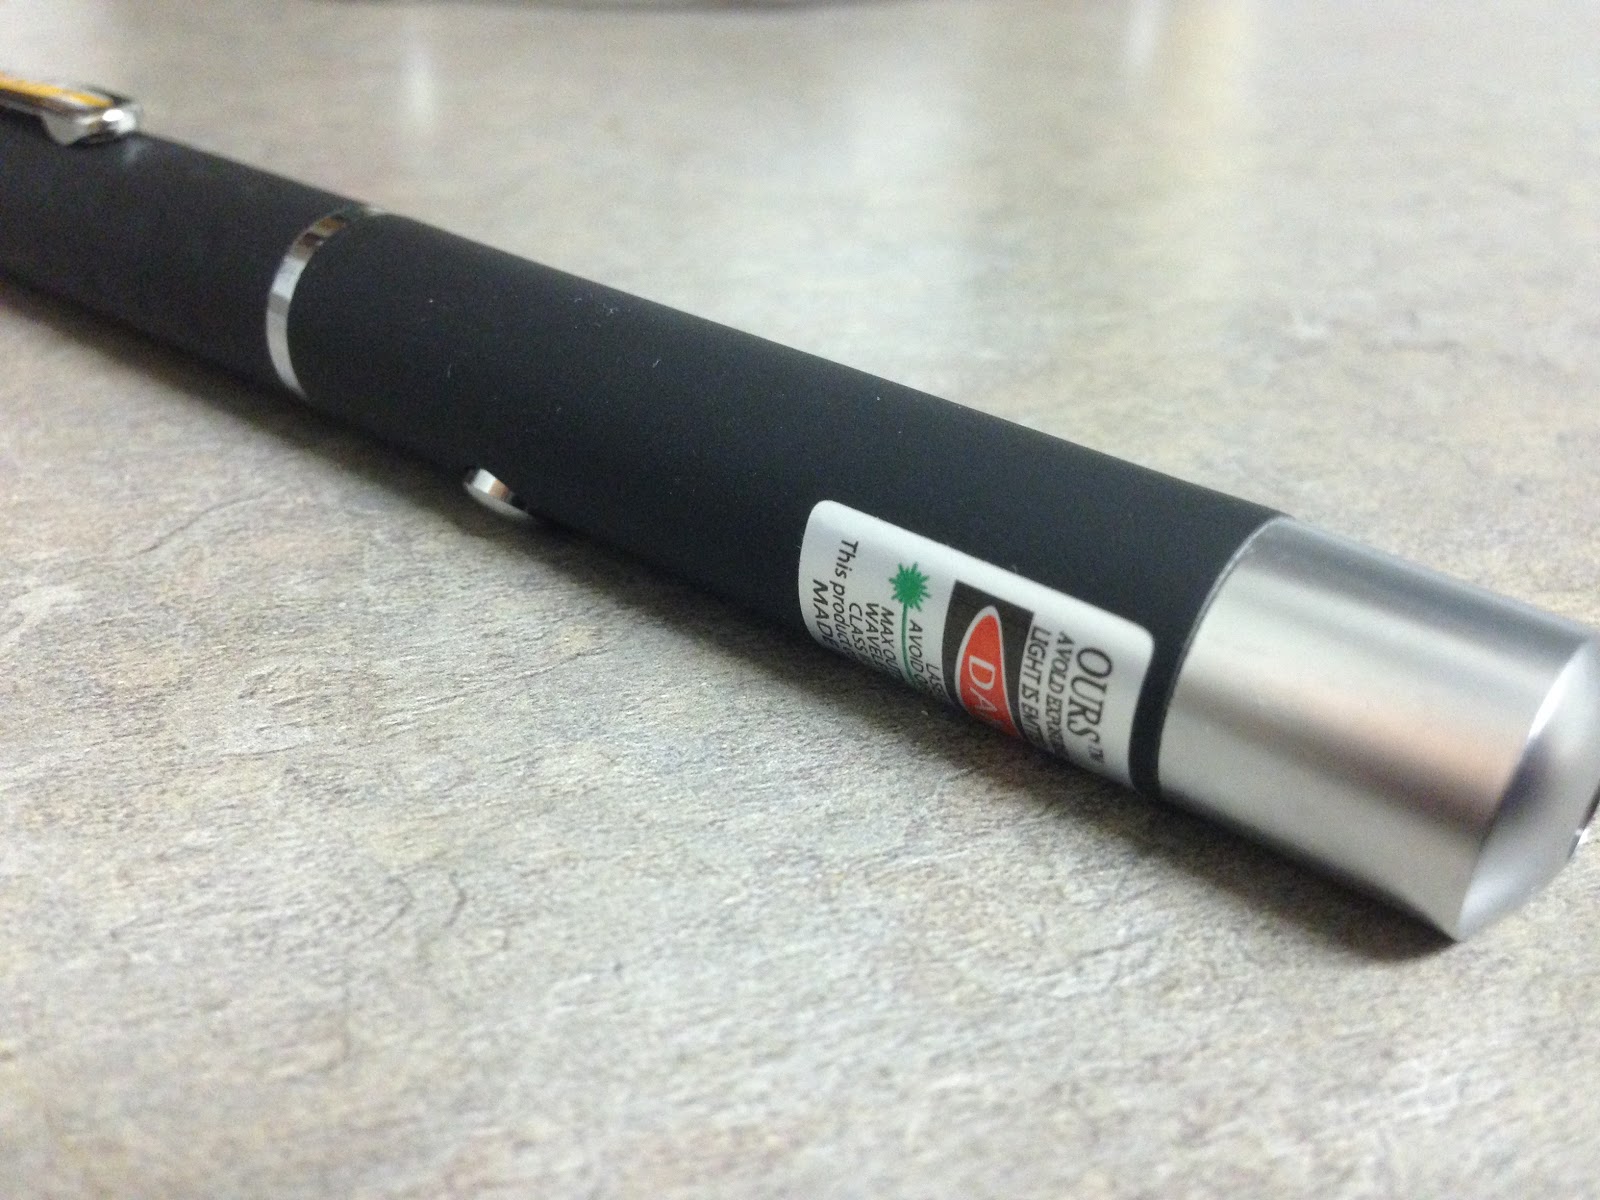 laser pointer with safety label